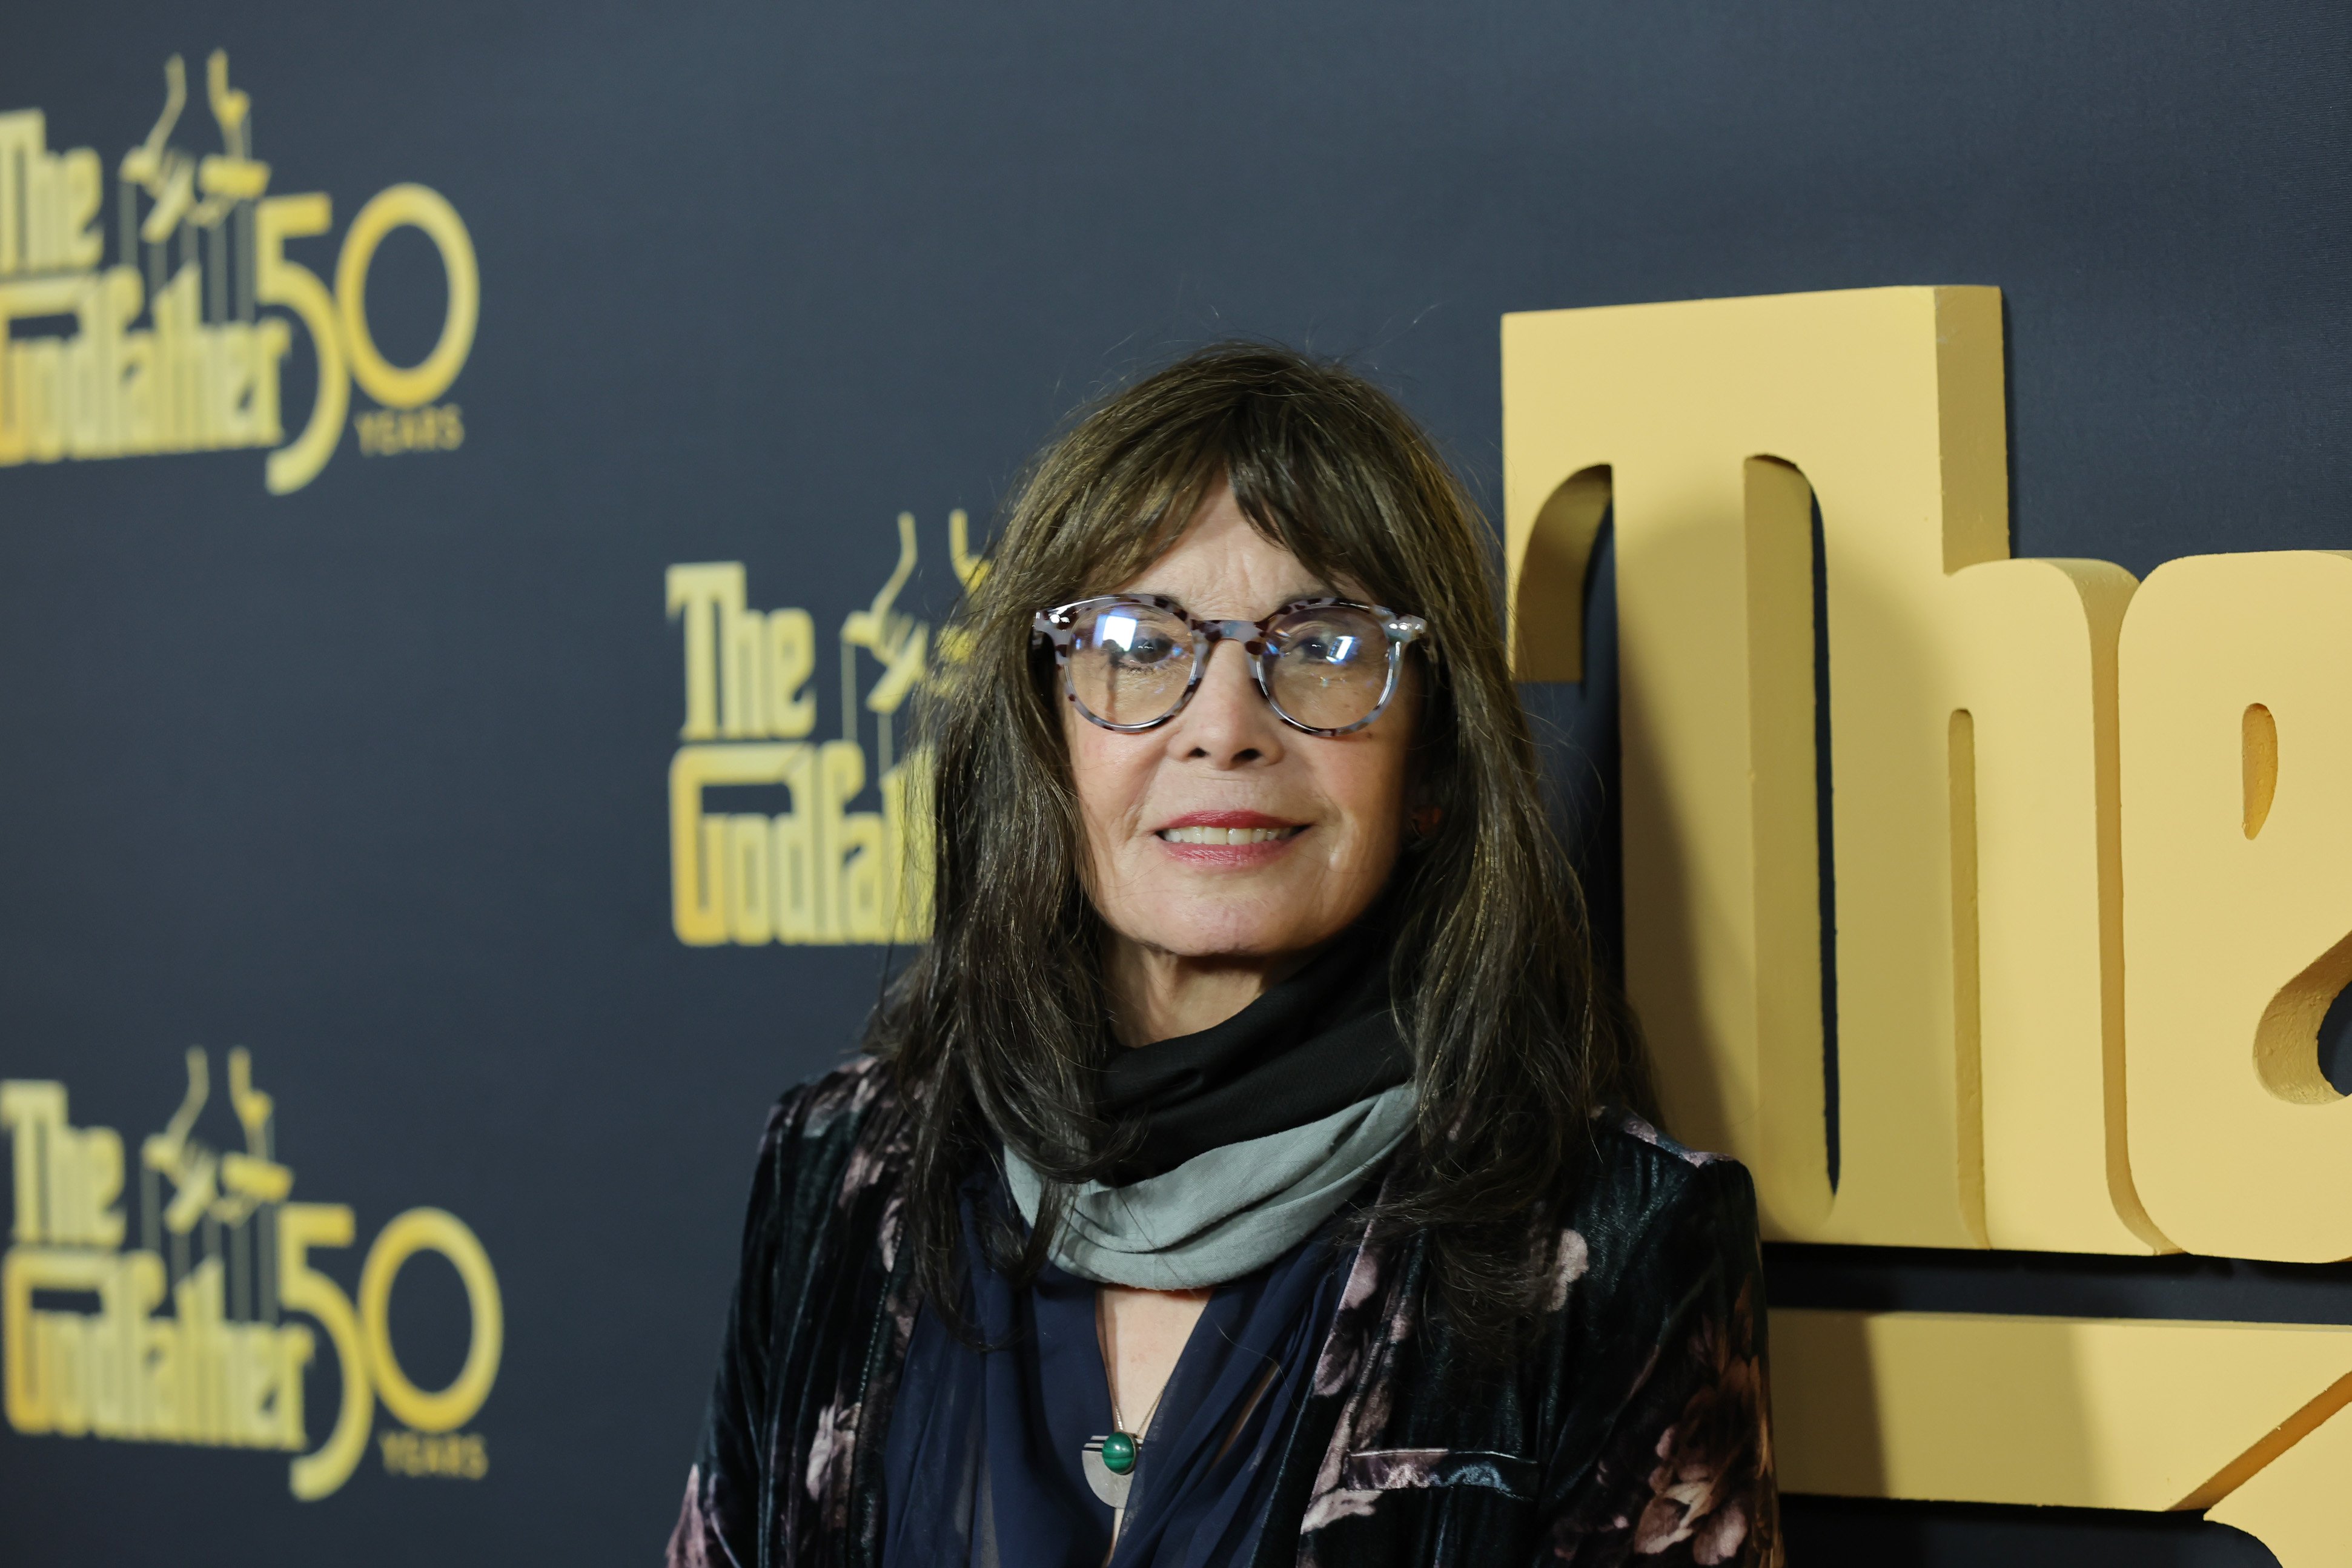 Talia Shire says that she should not have been cast in The Godfather with director Francis Ford Coppola.